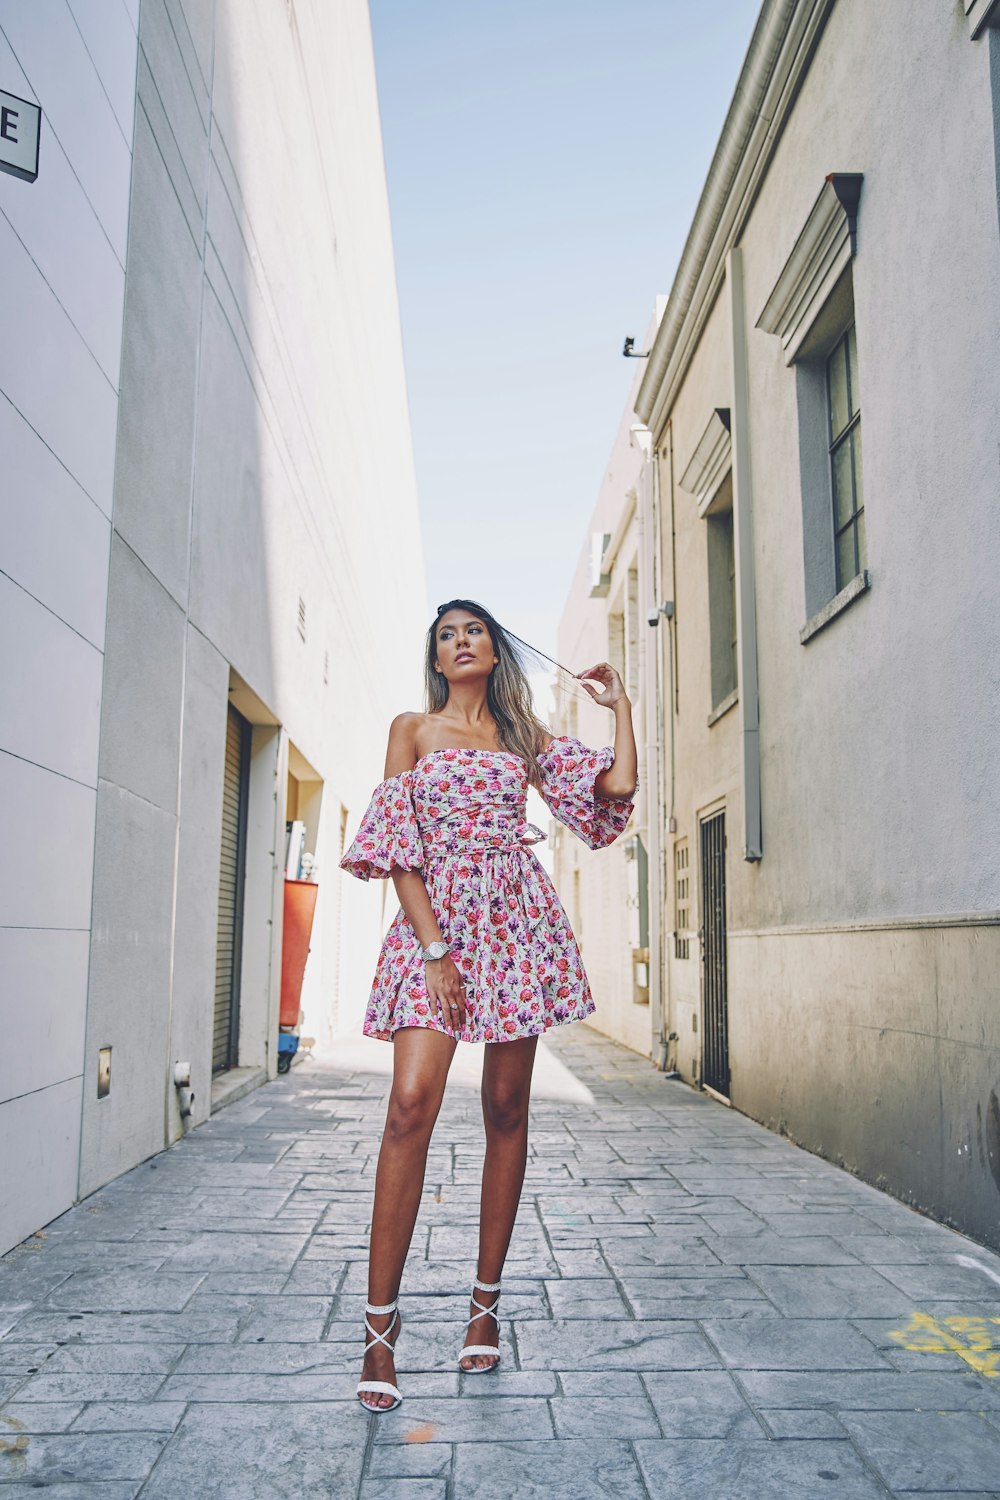 woman in pink and white floral dress standing on gray concrete floor during daytime